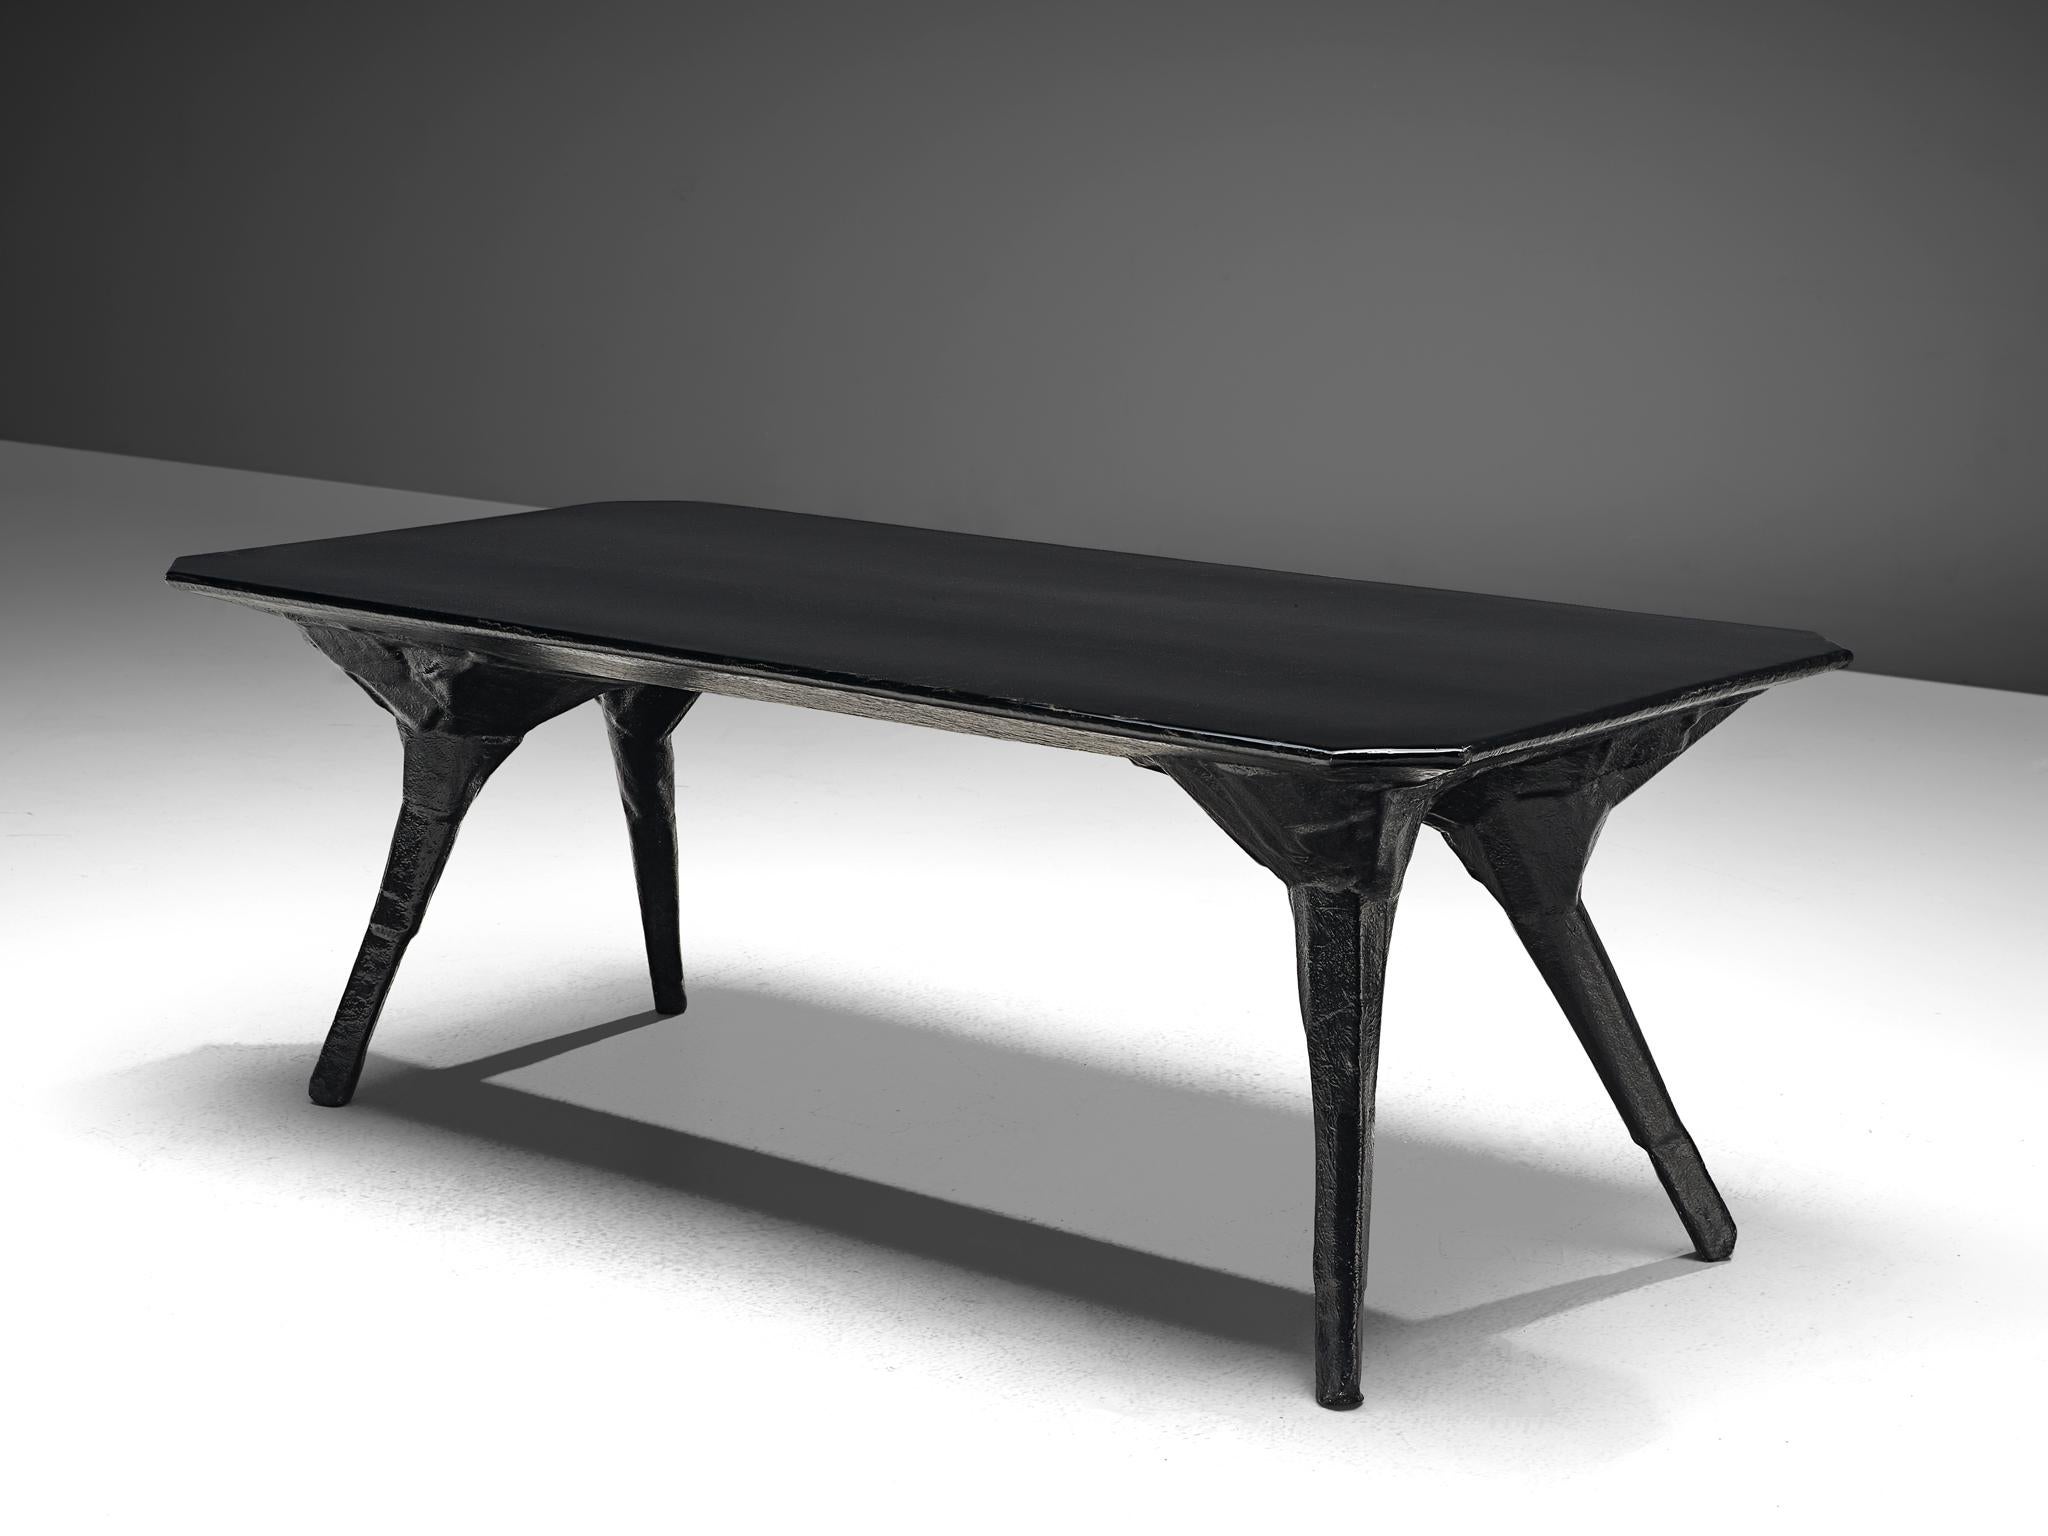 Post-Modern El Ultimo Grito Dining Table with Sculptural Legs